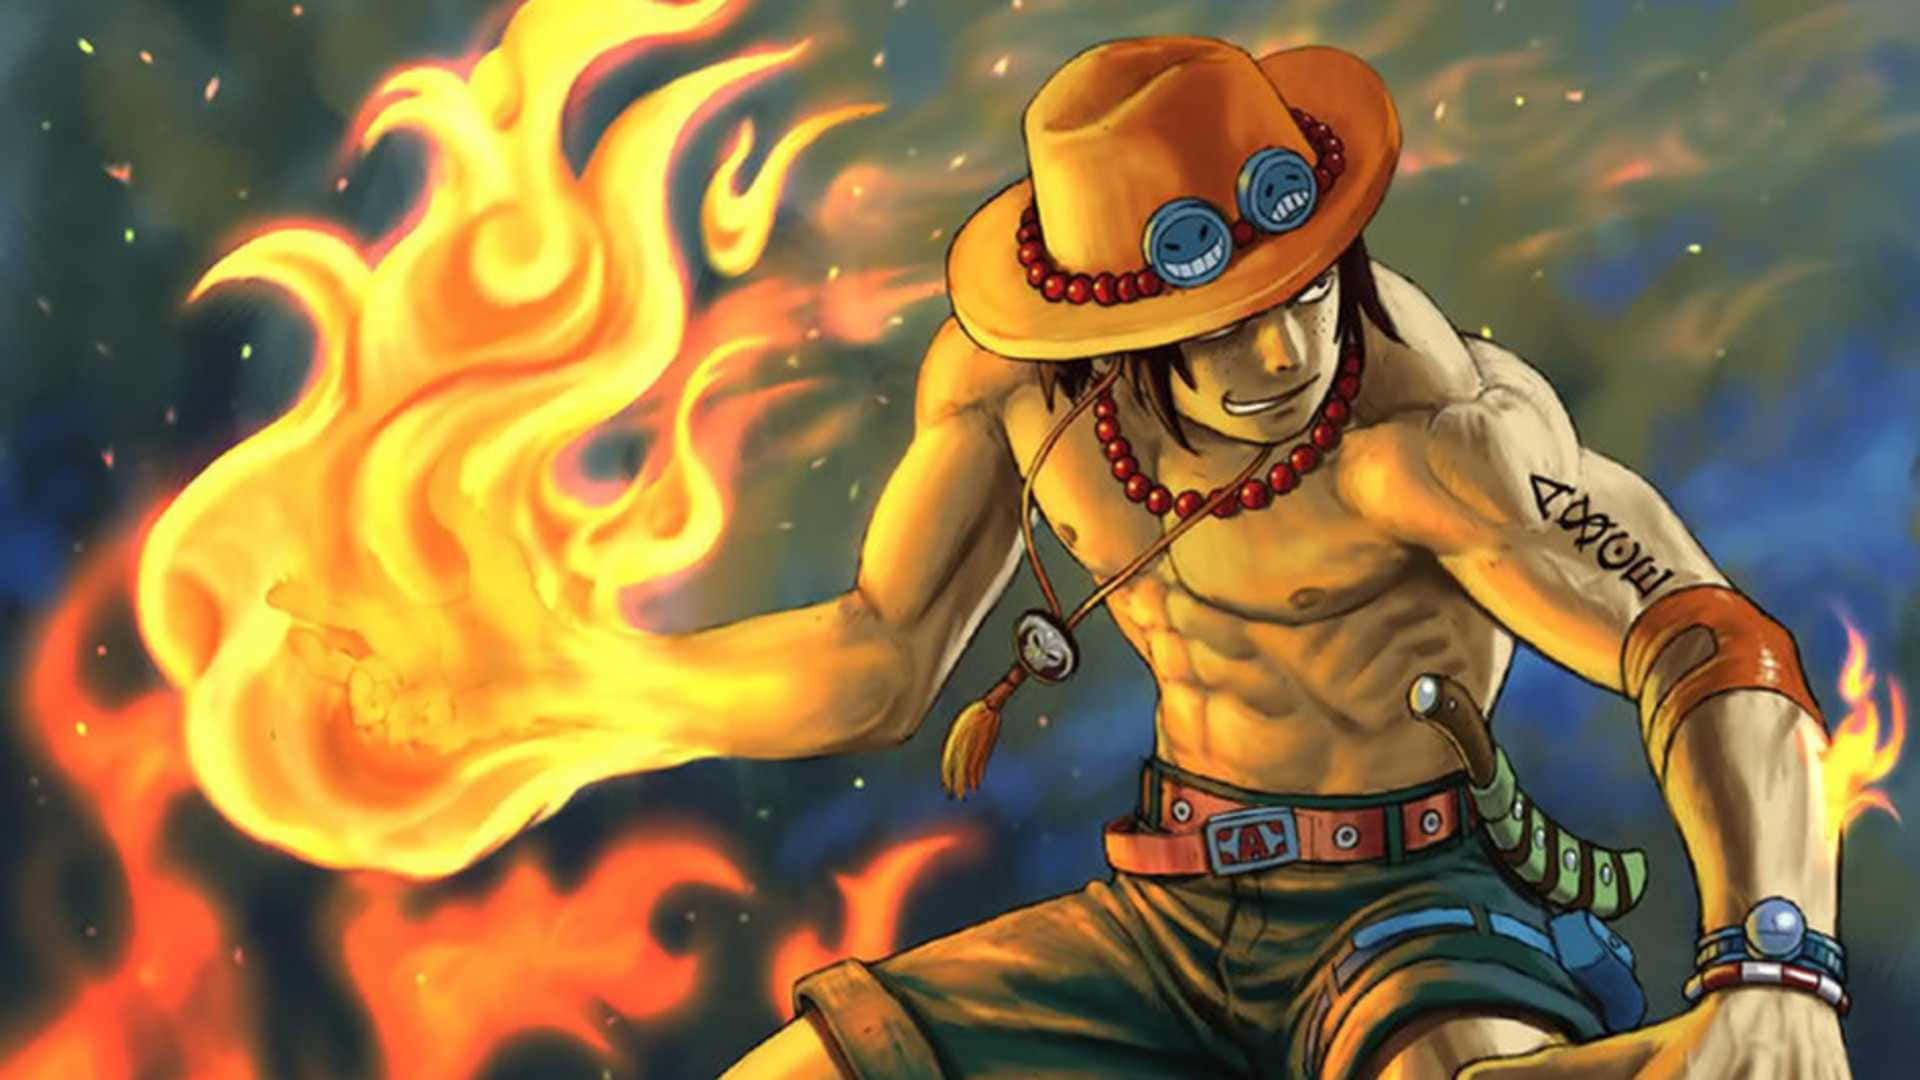 Portgas D Ace, the Legendary One Piece Pirate Wallpaper